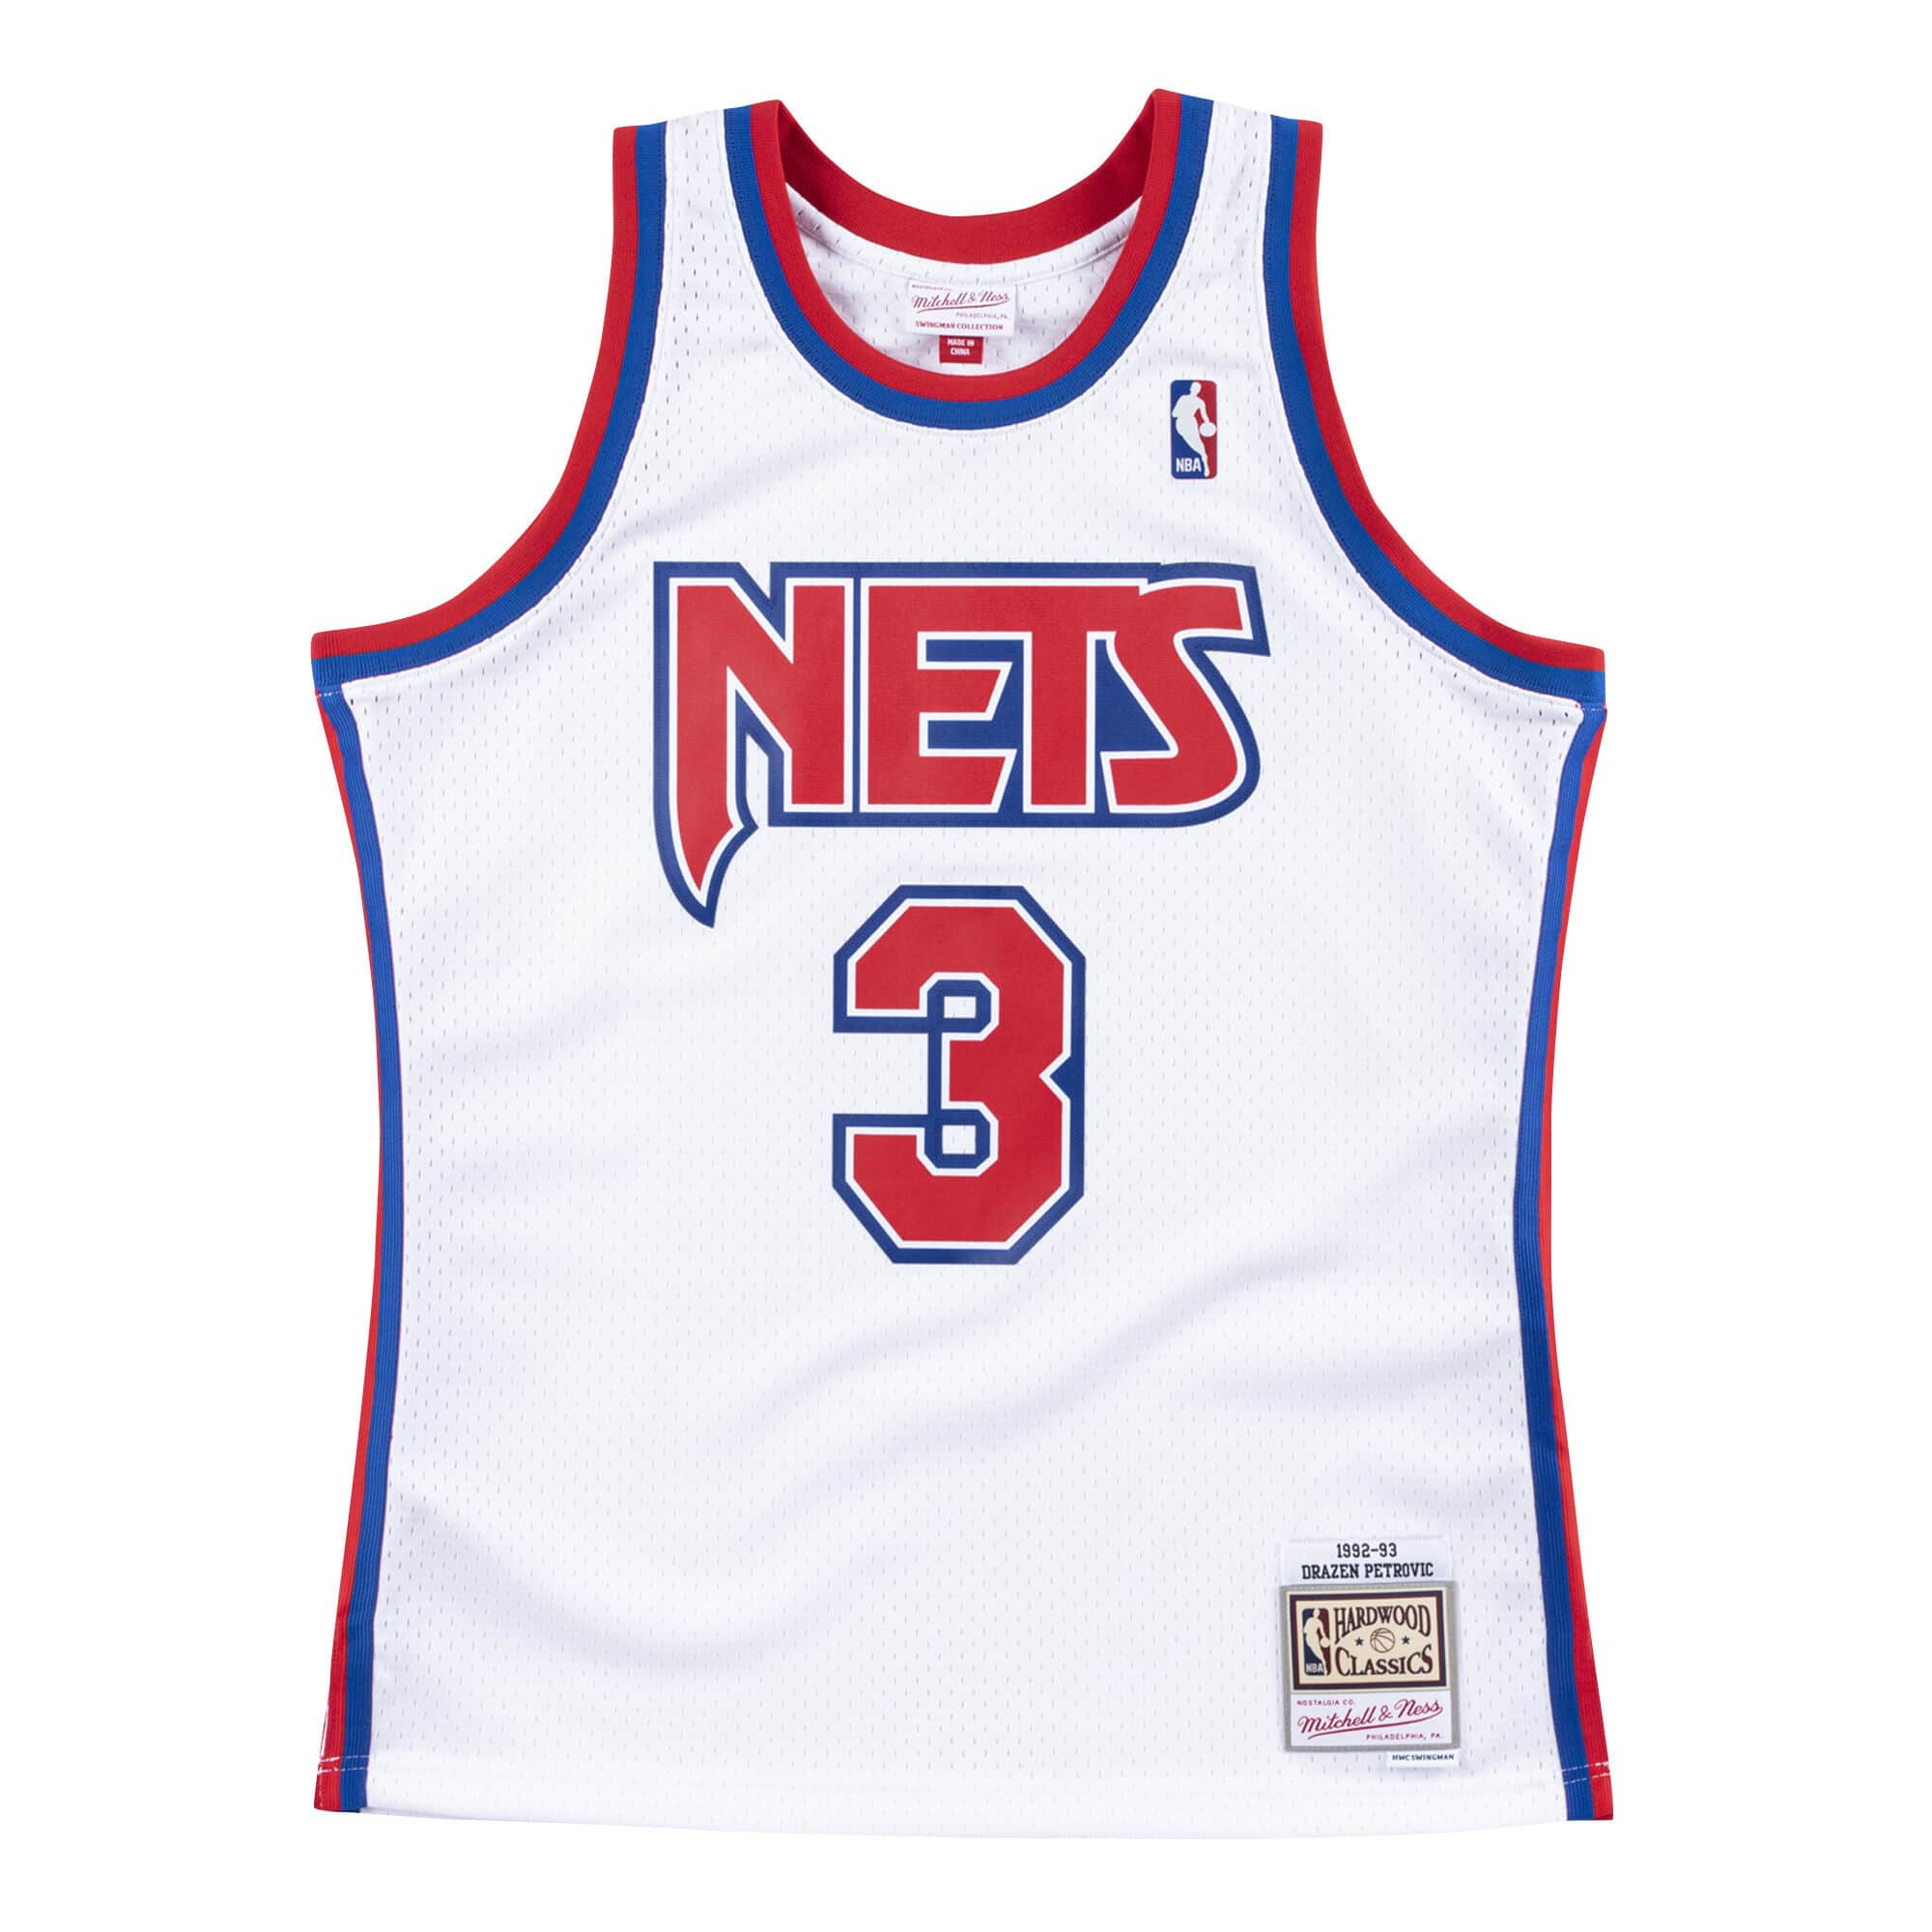 new jersey nets red jersey